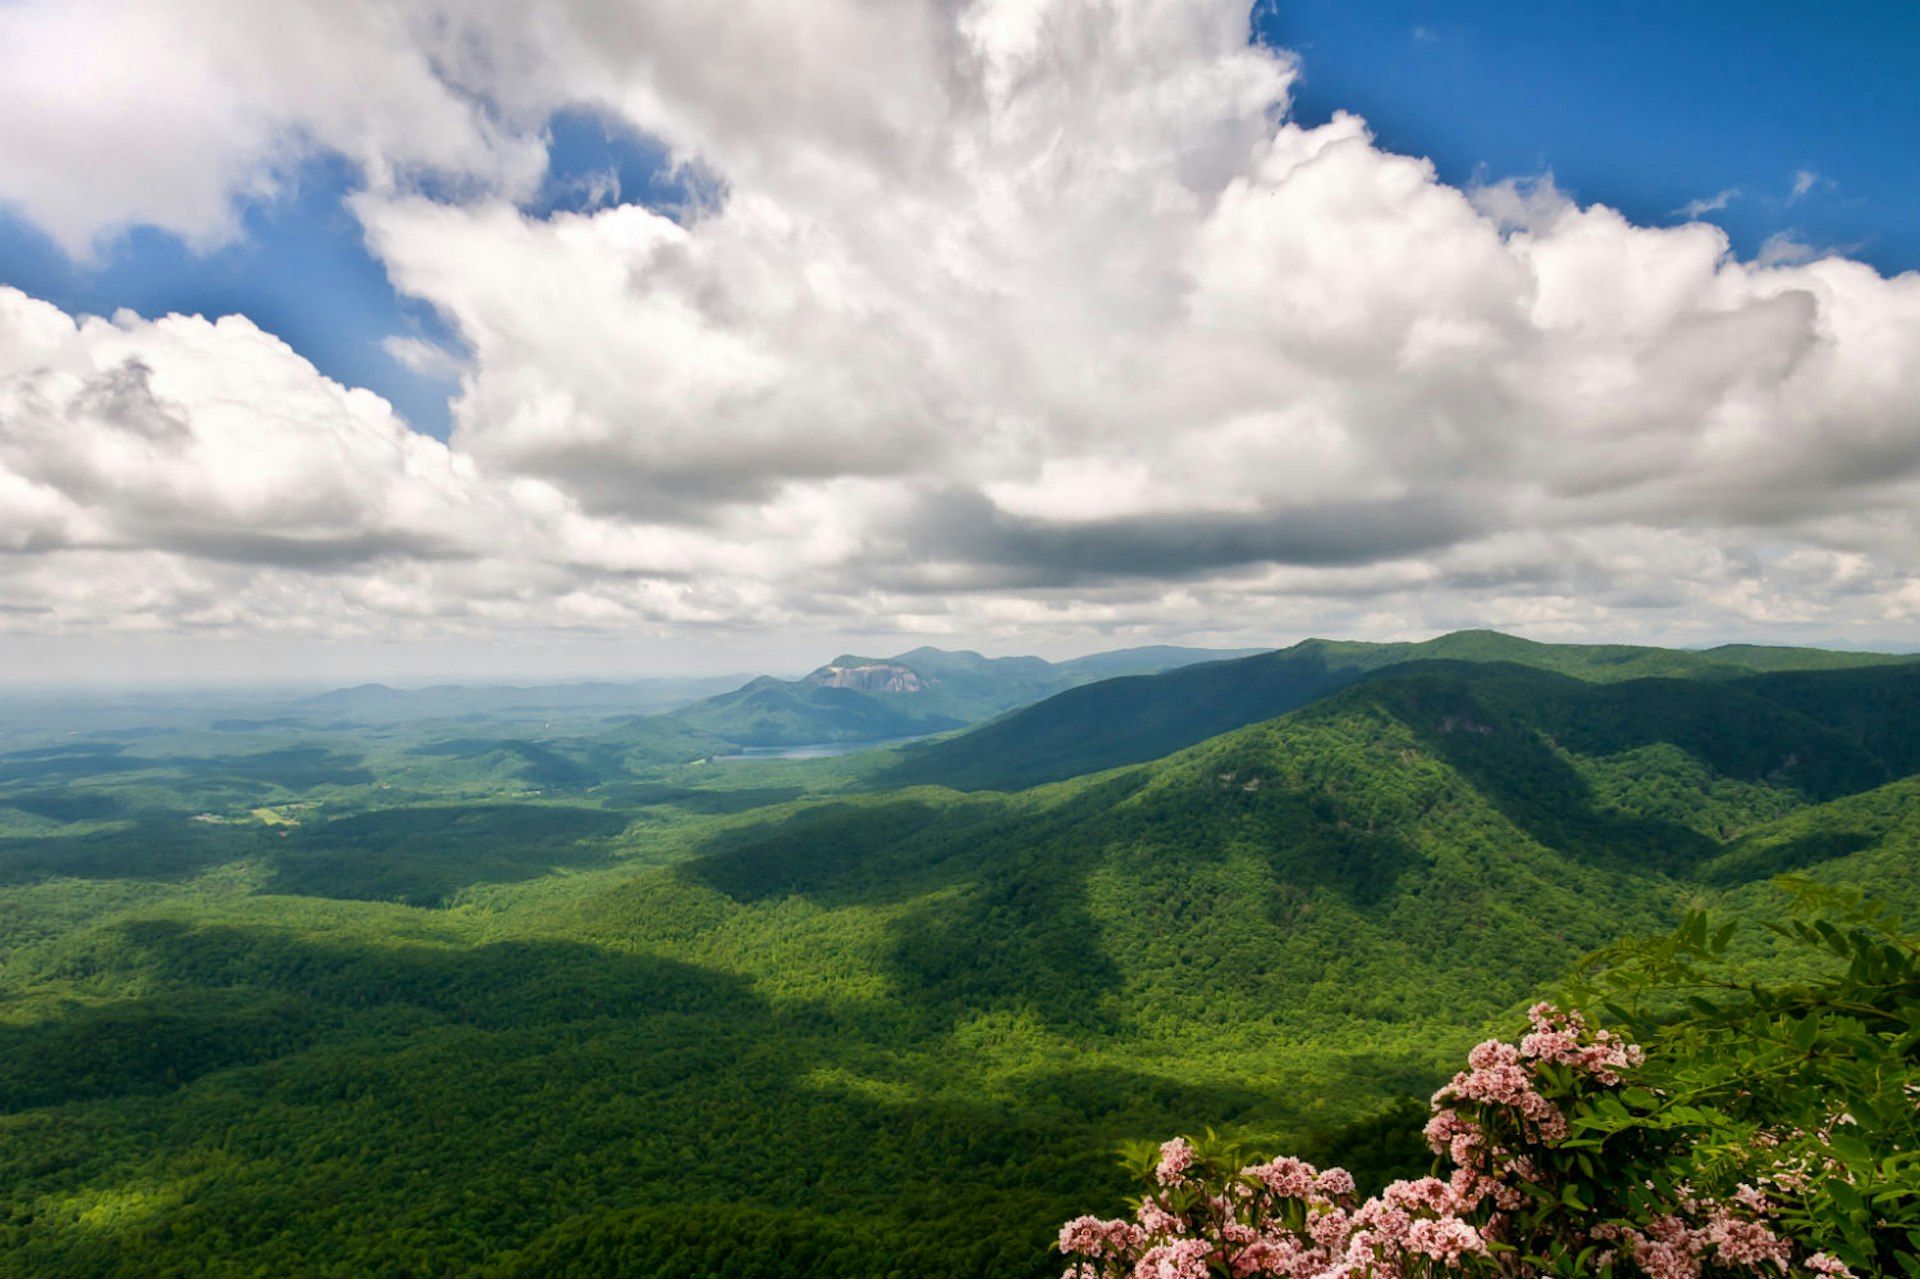 Looking out to Table Rock. Image courtesy of Nature Walk Photography / VisitGreenvilleSC.